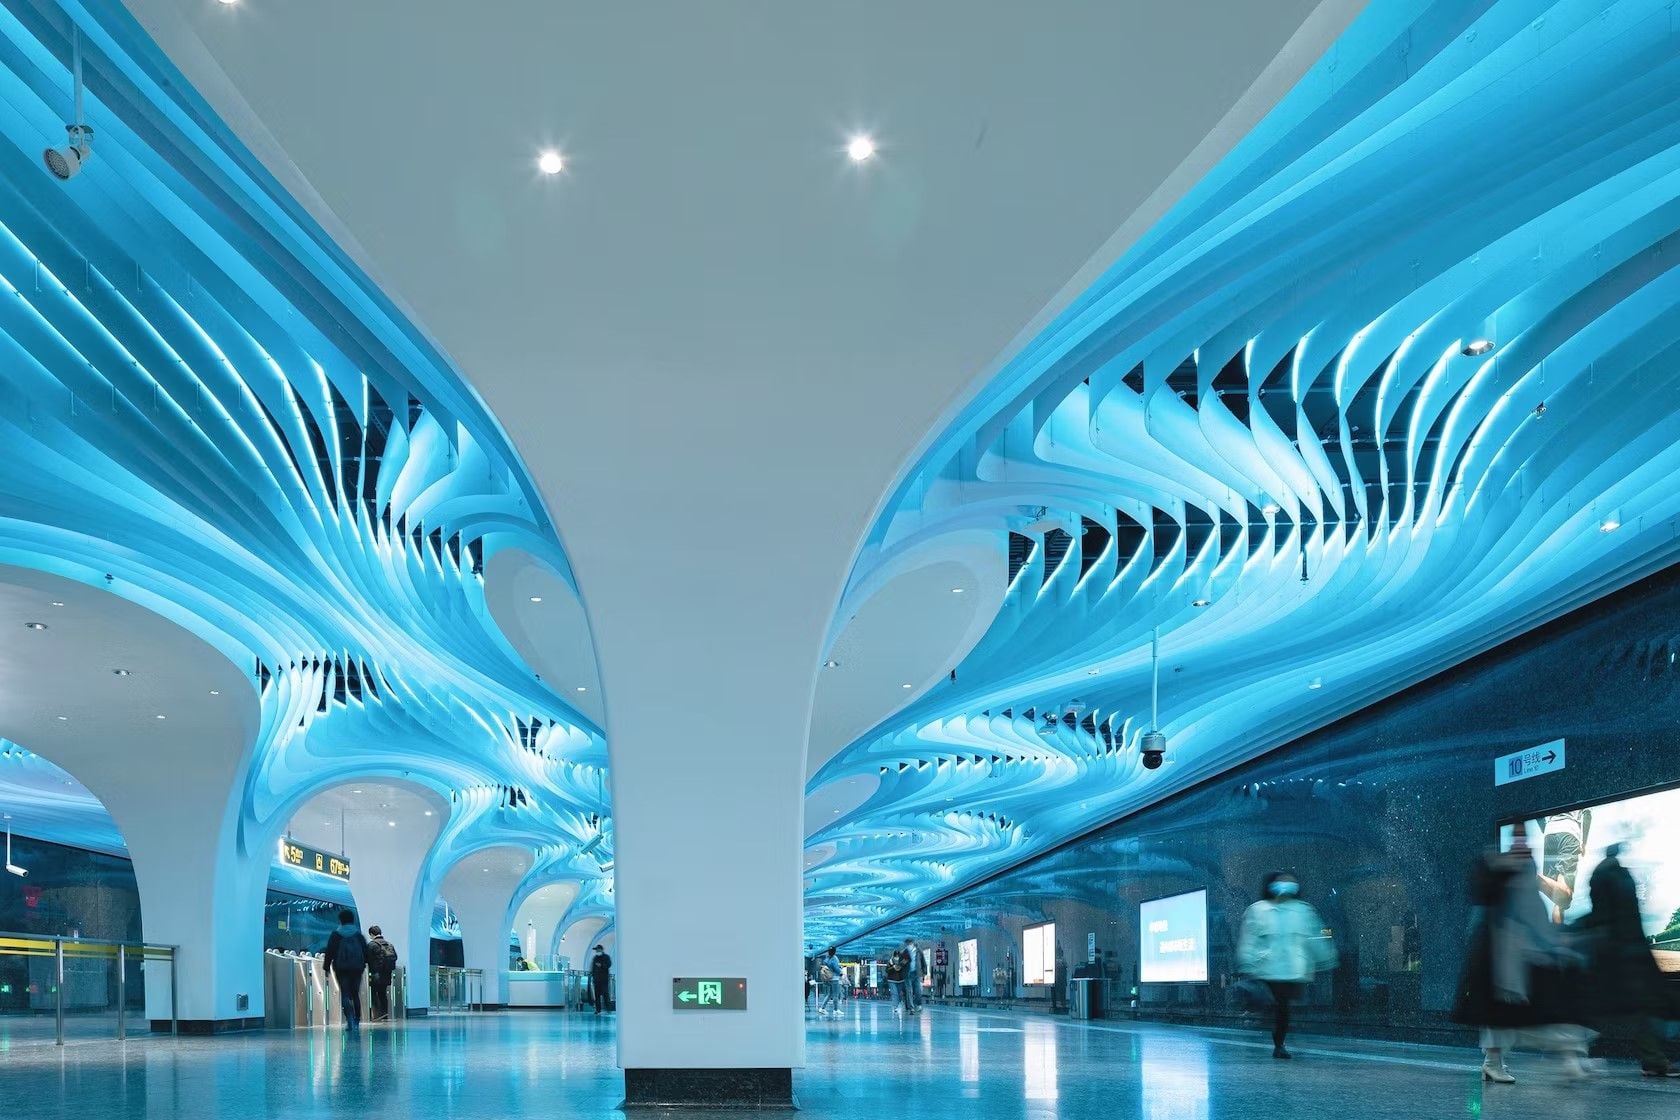 Renovated Yuyuan Station ceilings by XING Design glow an ethereal blue color.